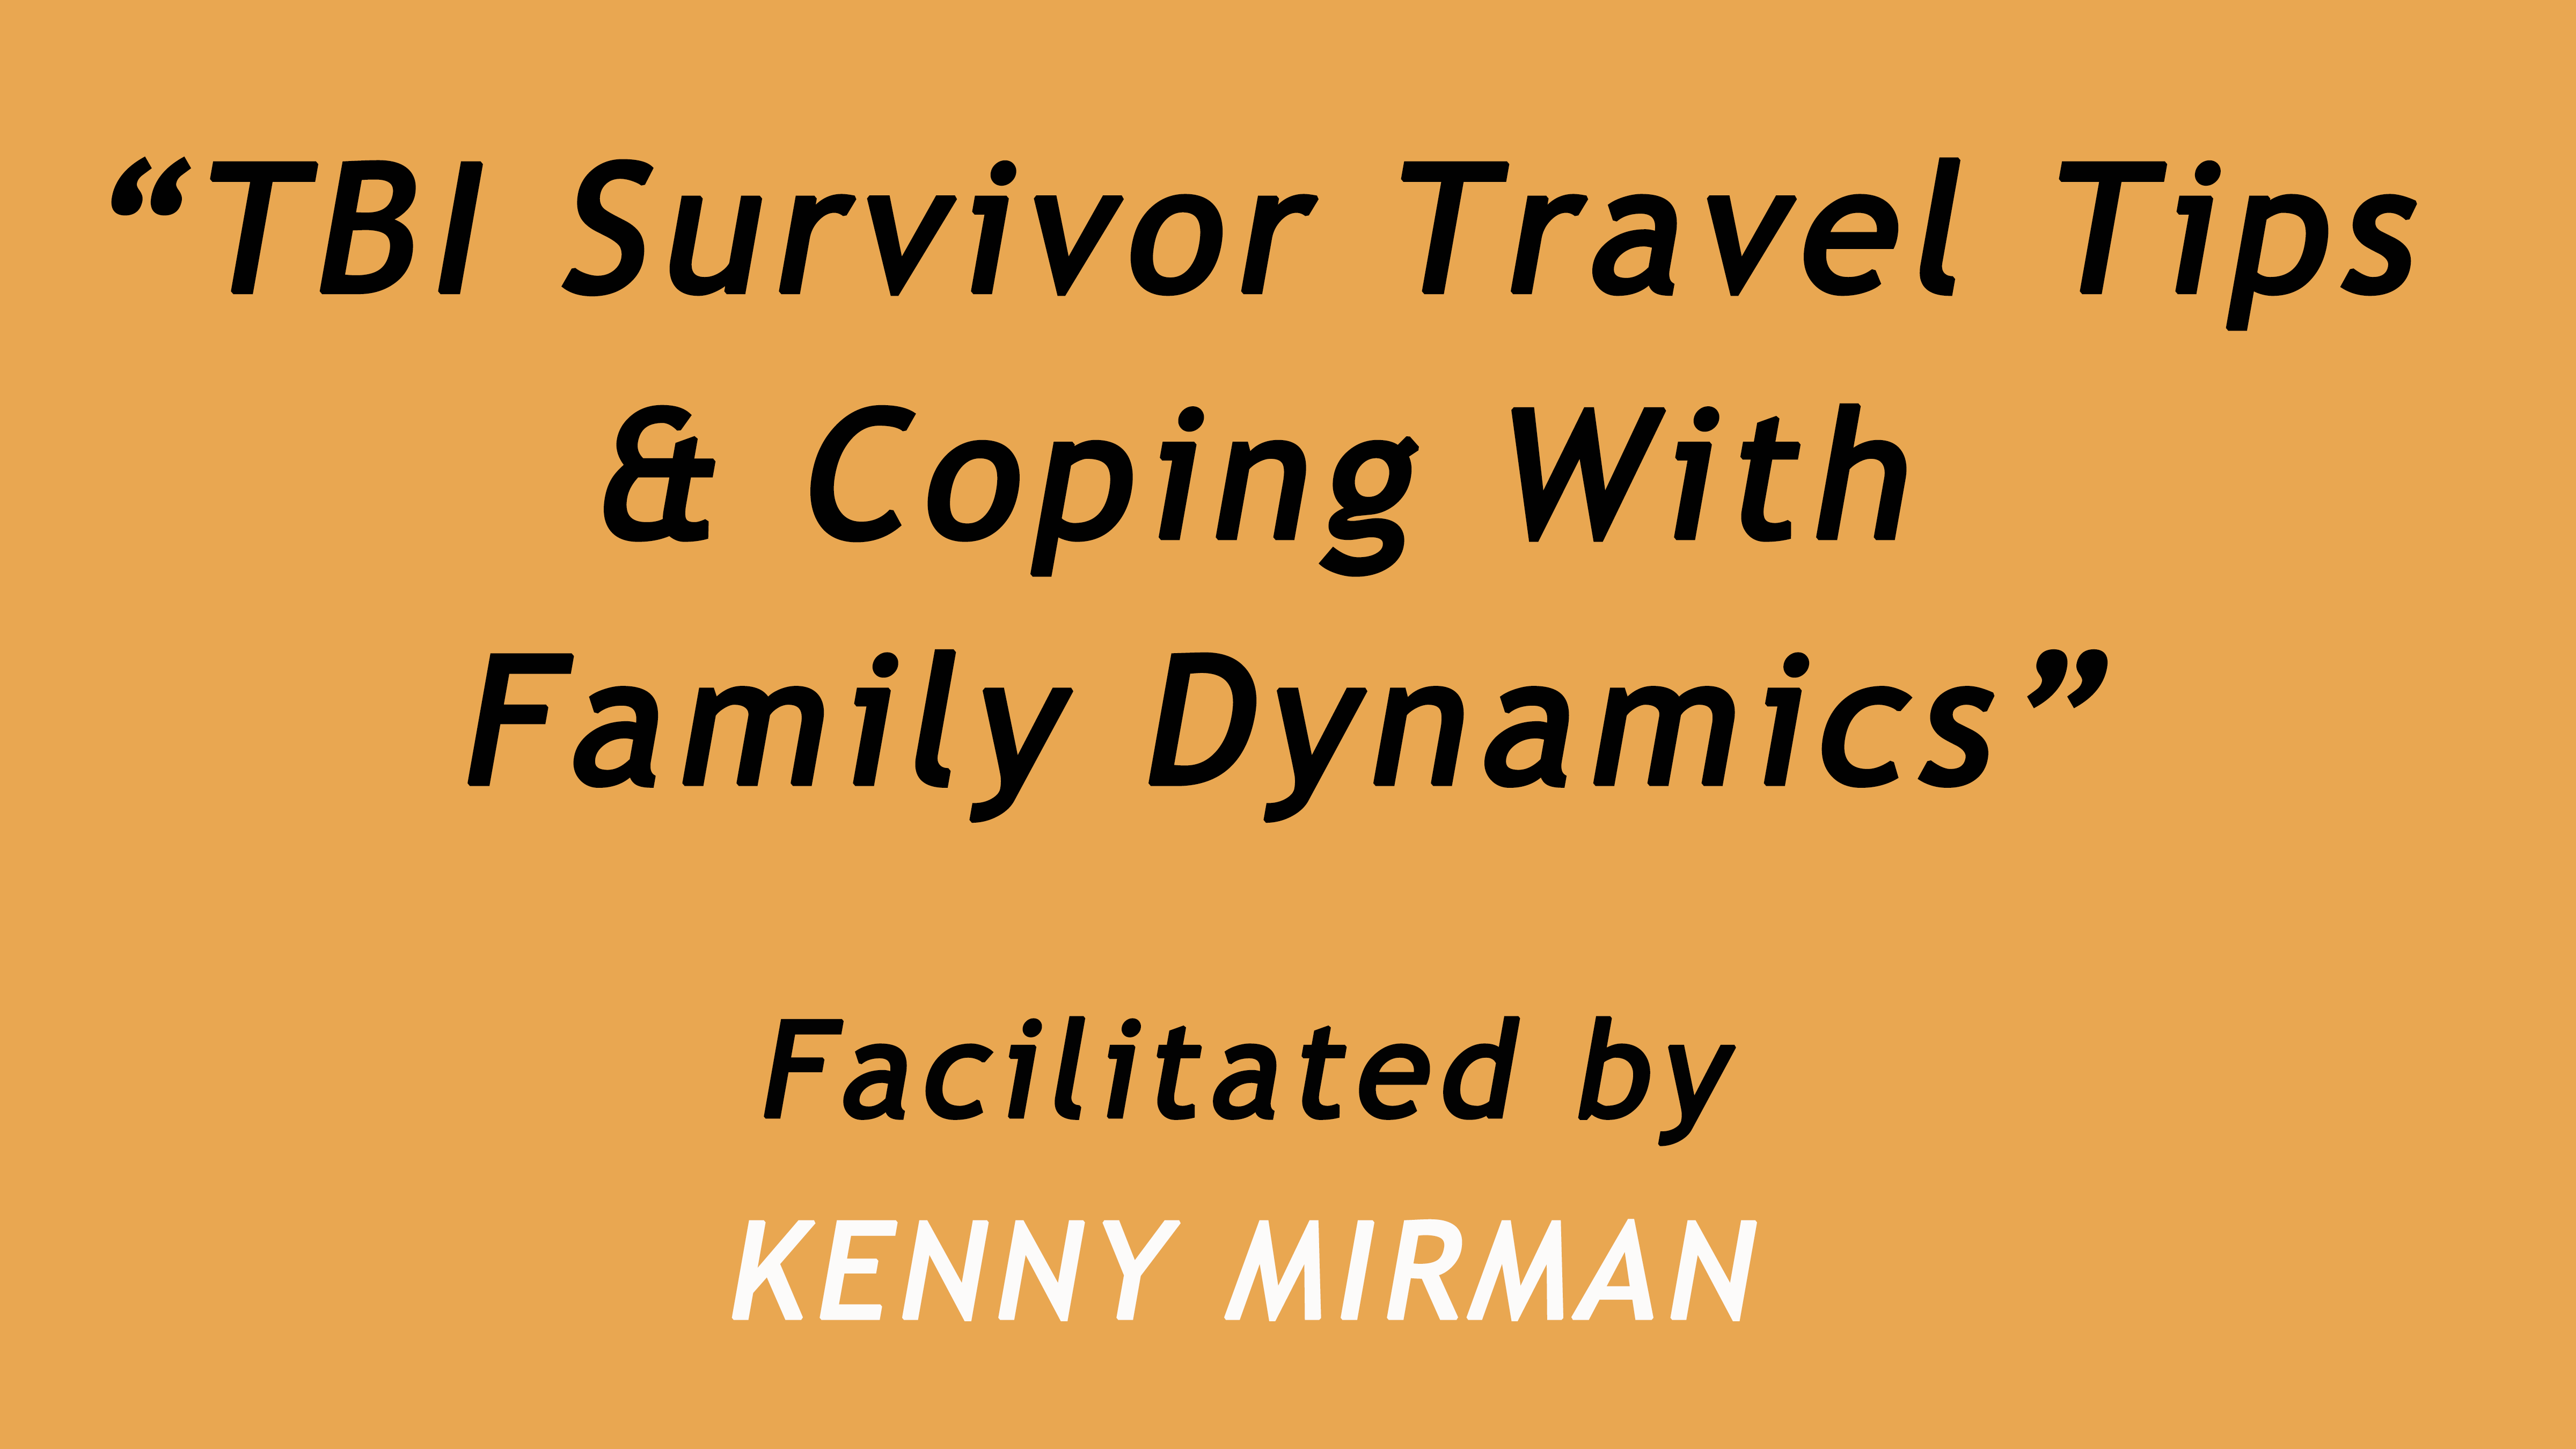 TBI Survivor Travel Tips and Coping With Family Dynamics